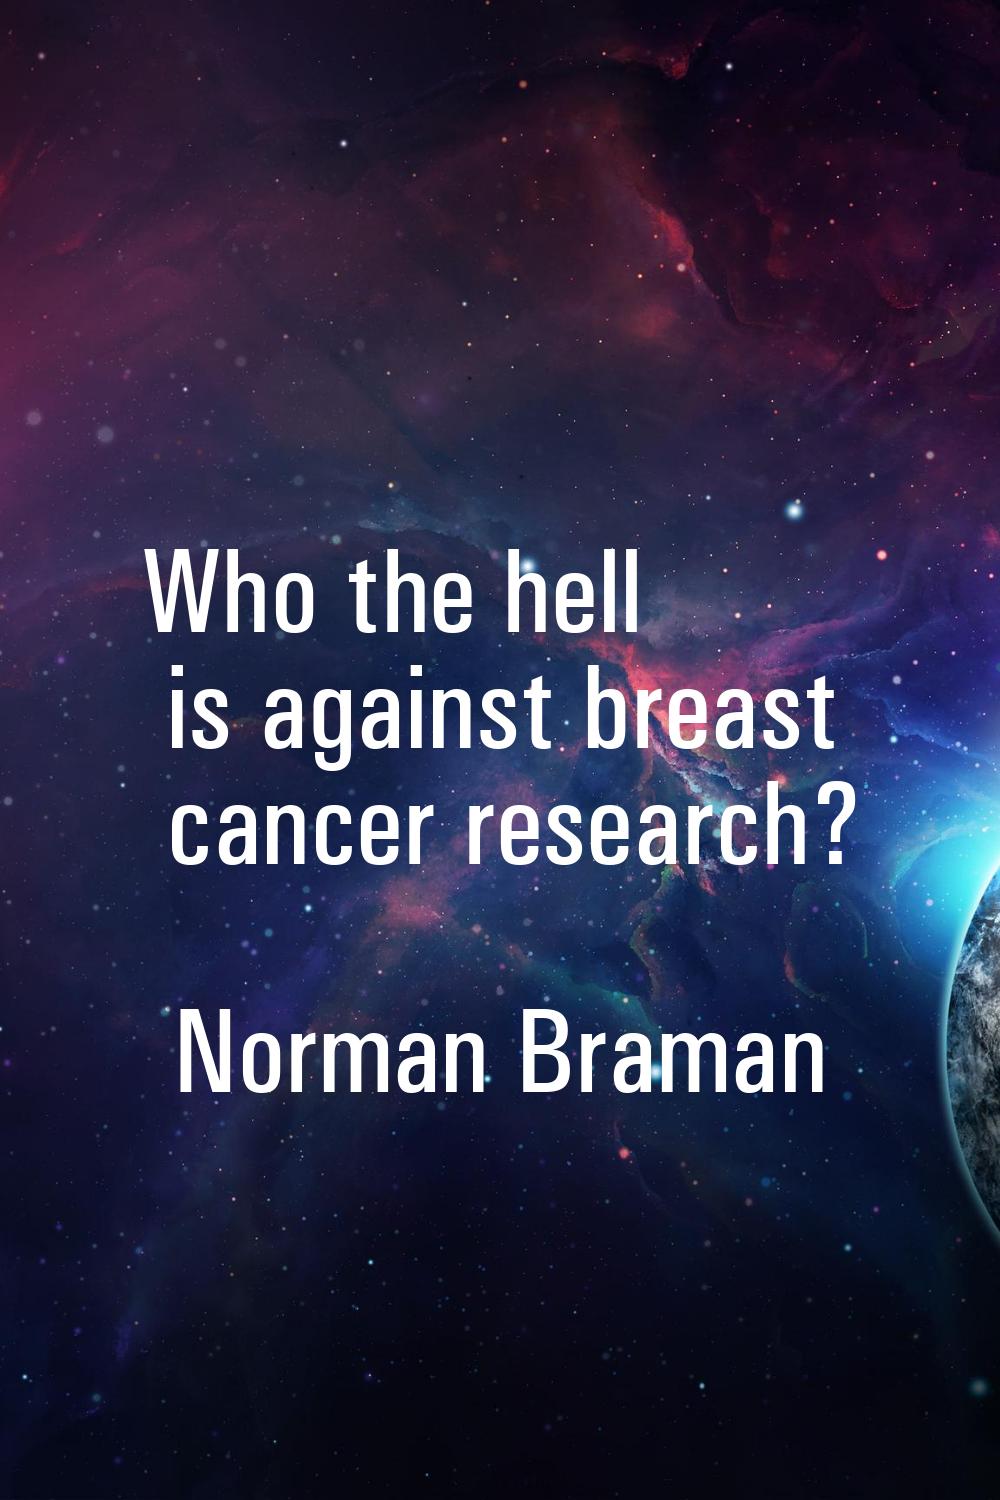 Who the hell is against breast cancer research?